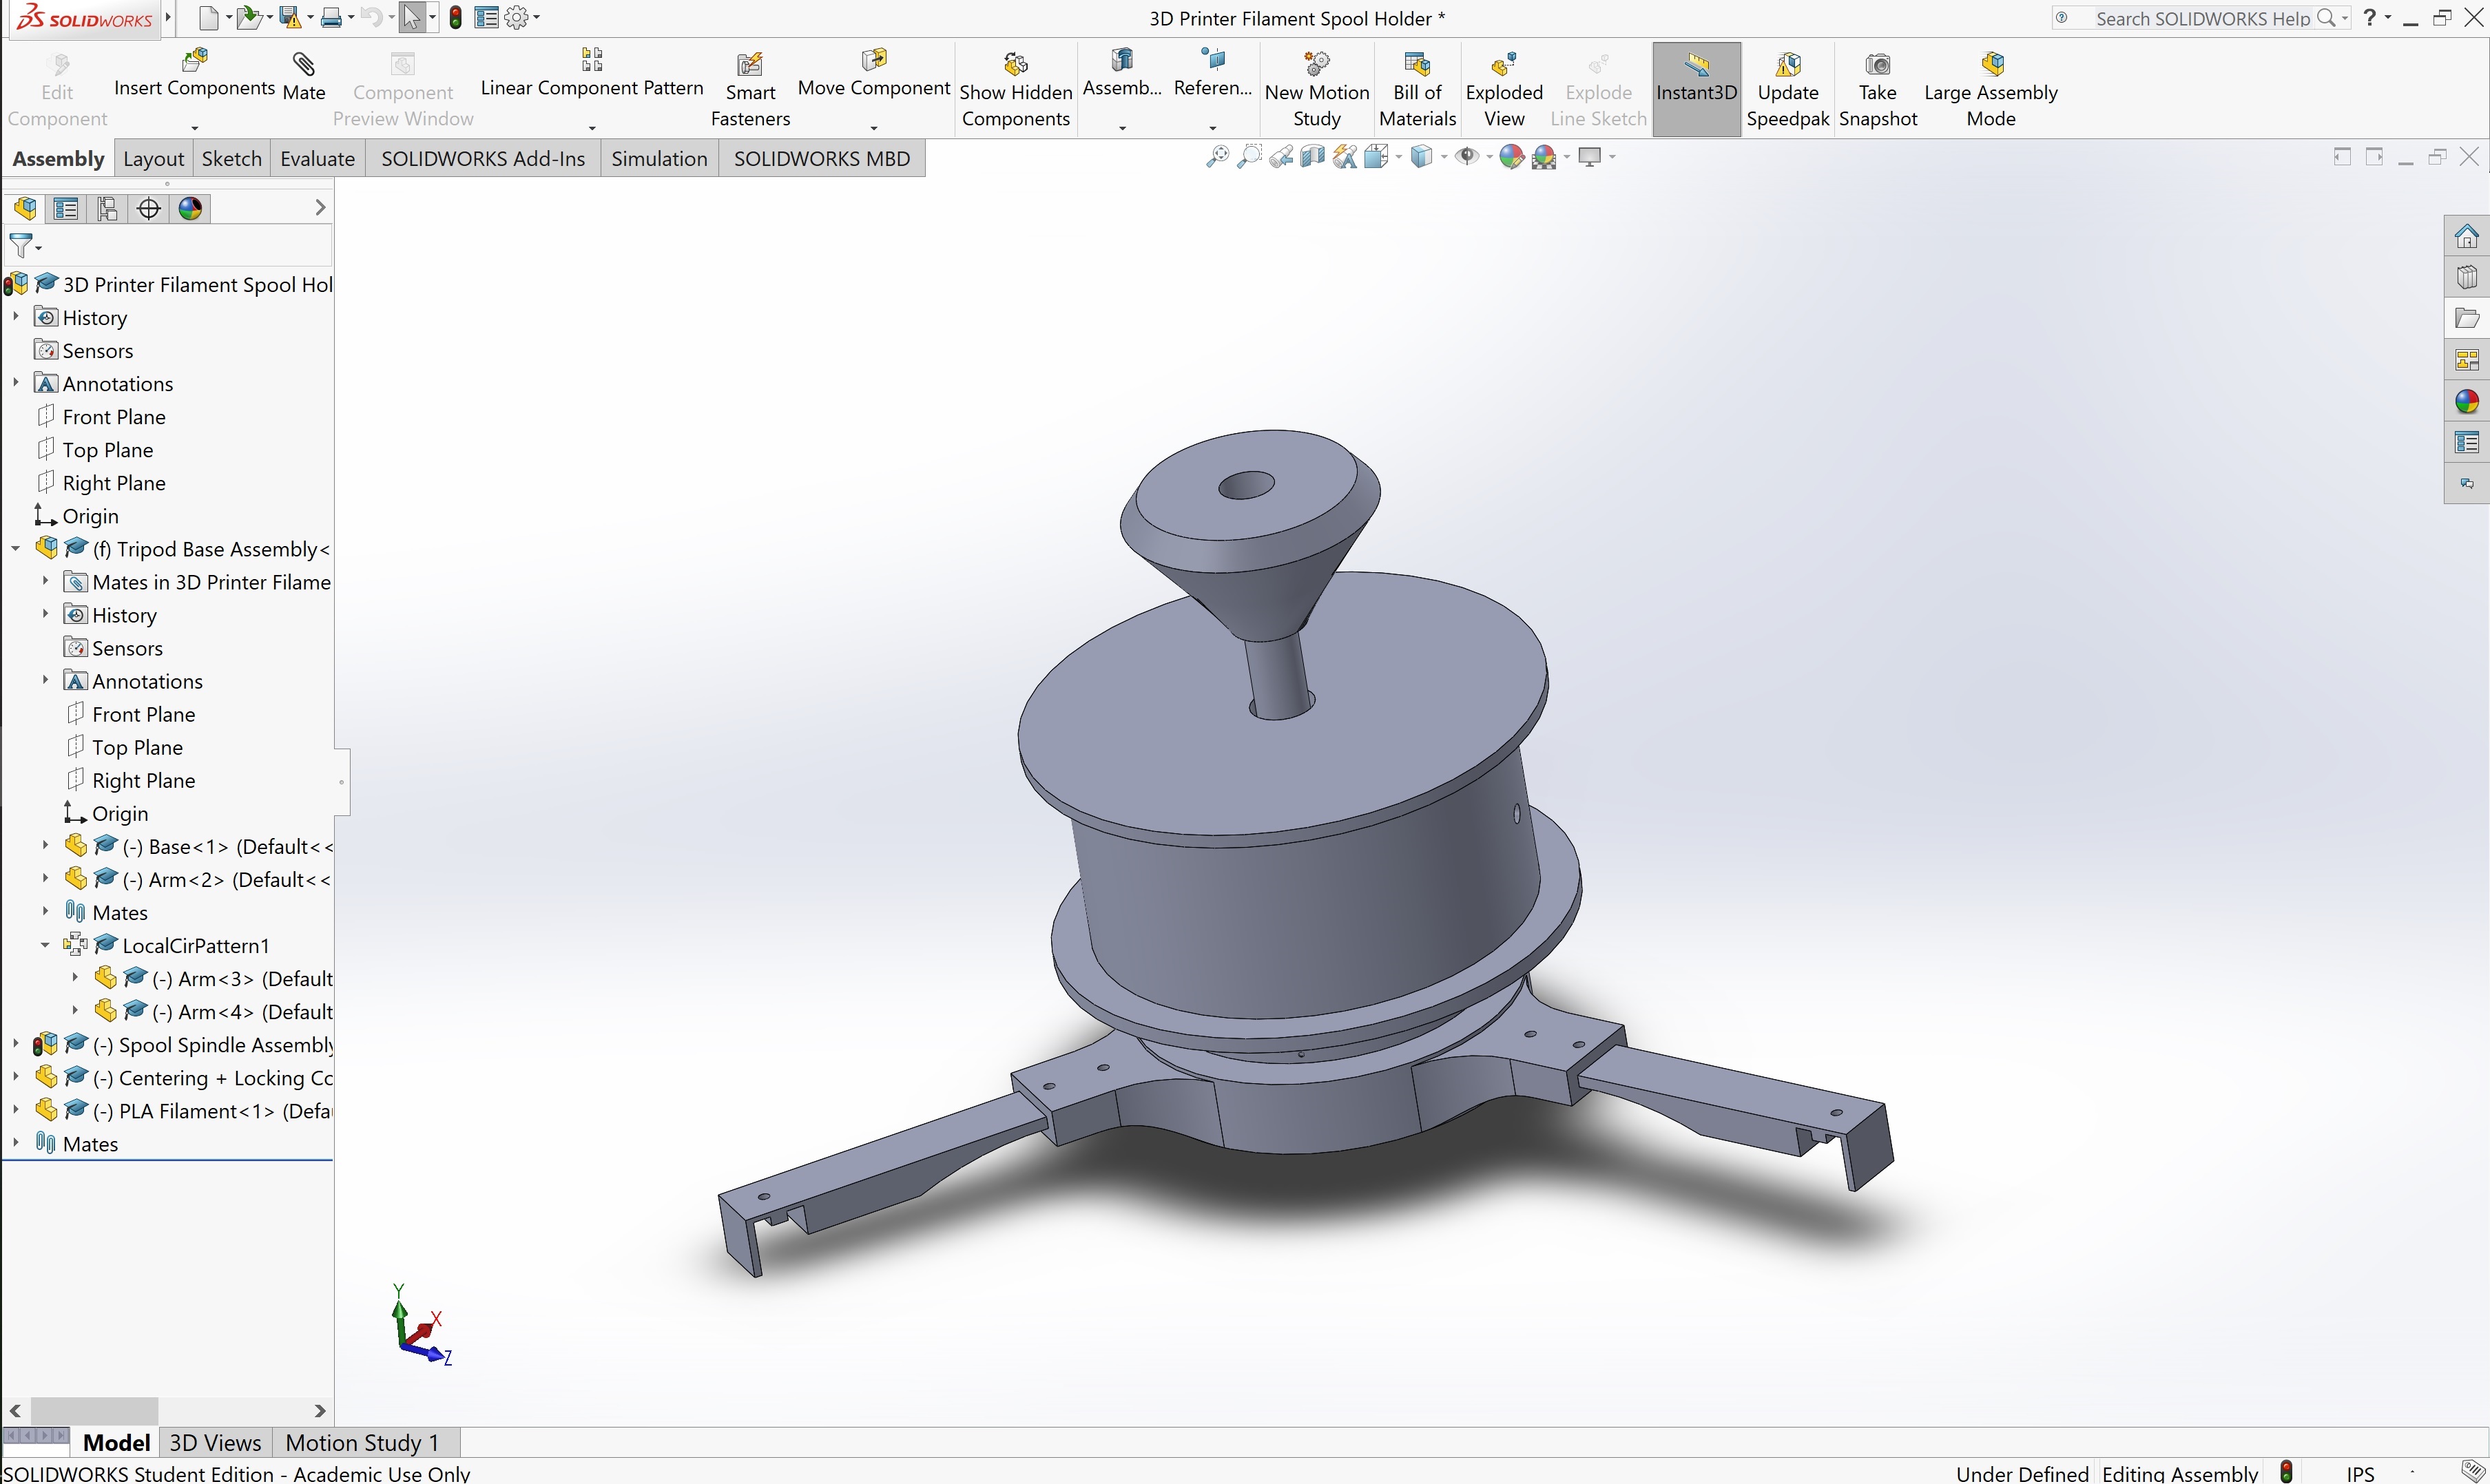 SolidWorks and AutoCAD Spool Filament Holder